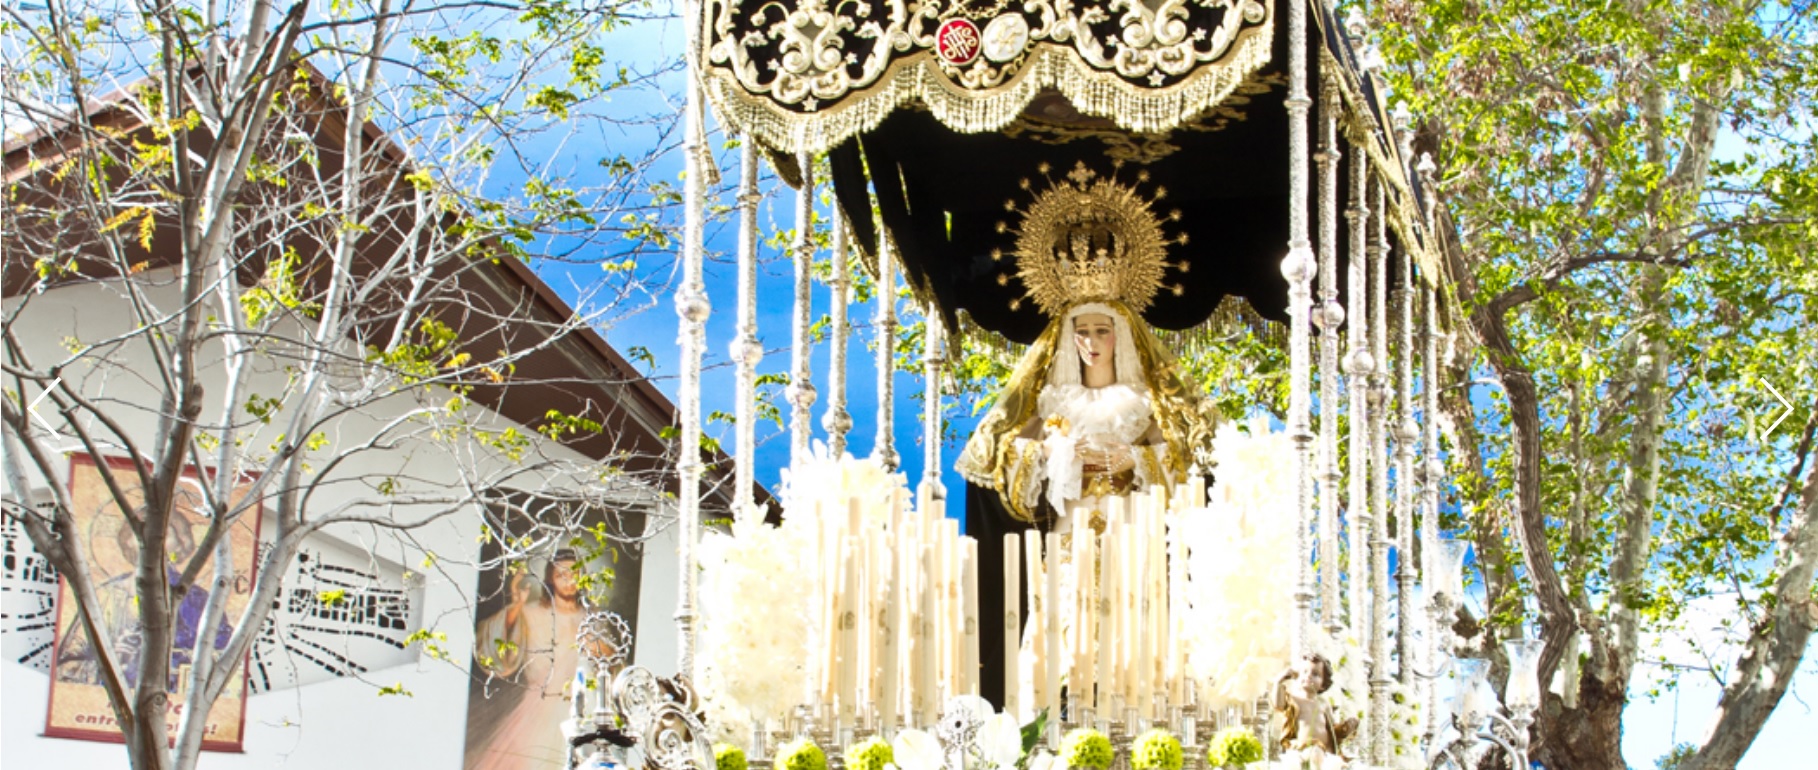 Easter week in Marbella - Schedules and itineraries - Marbella Unique Properties real estate